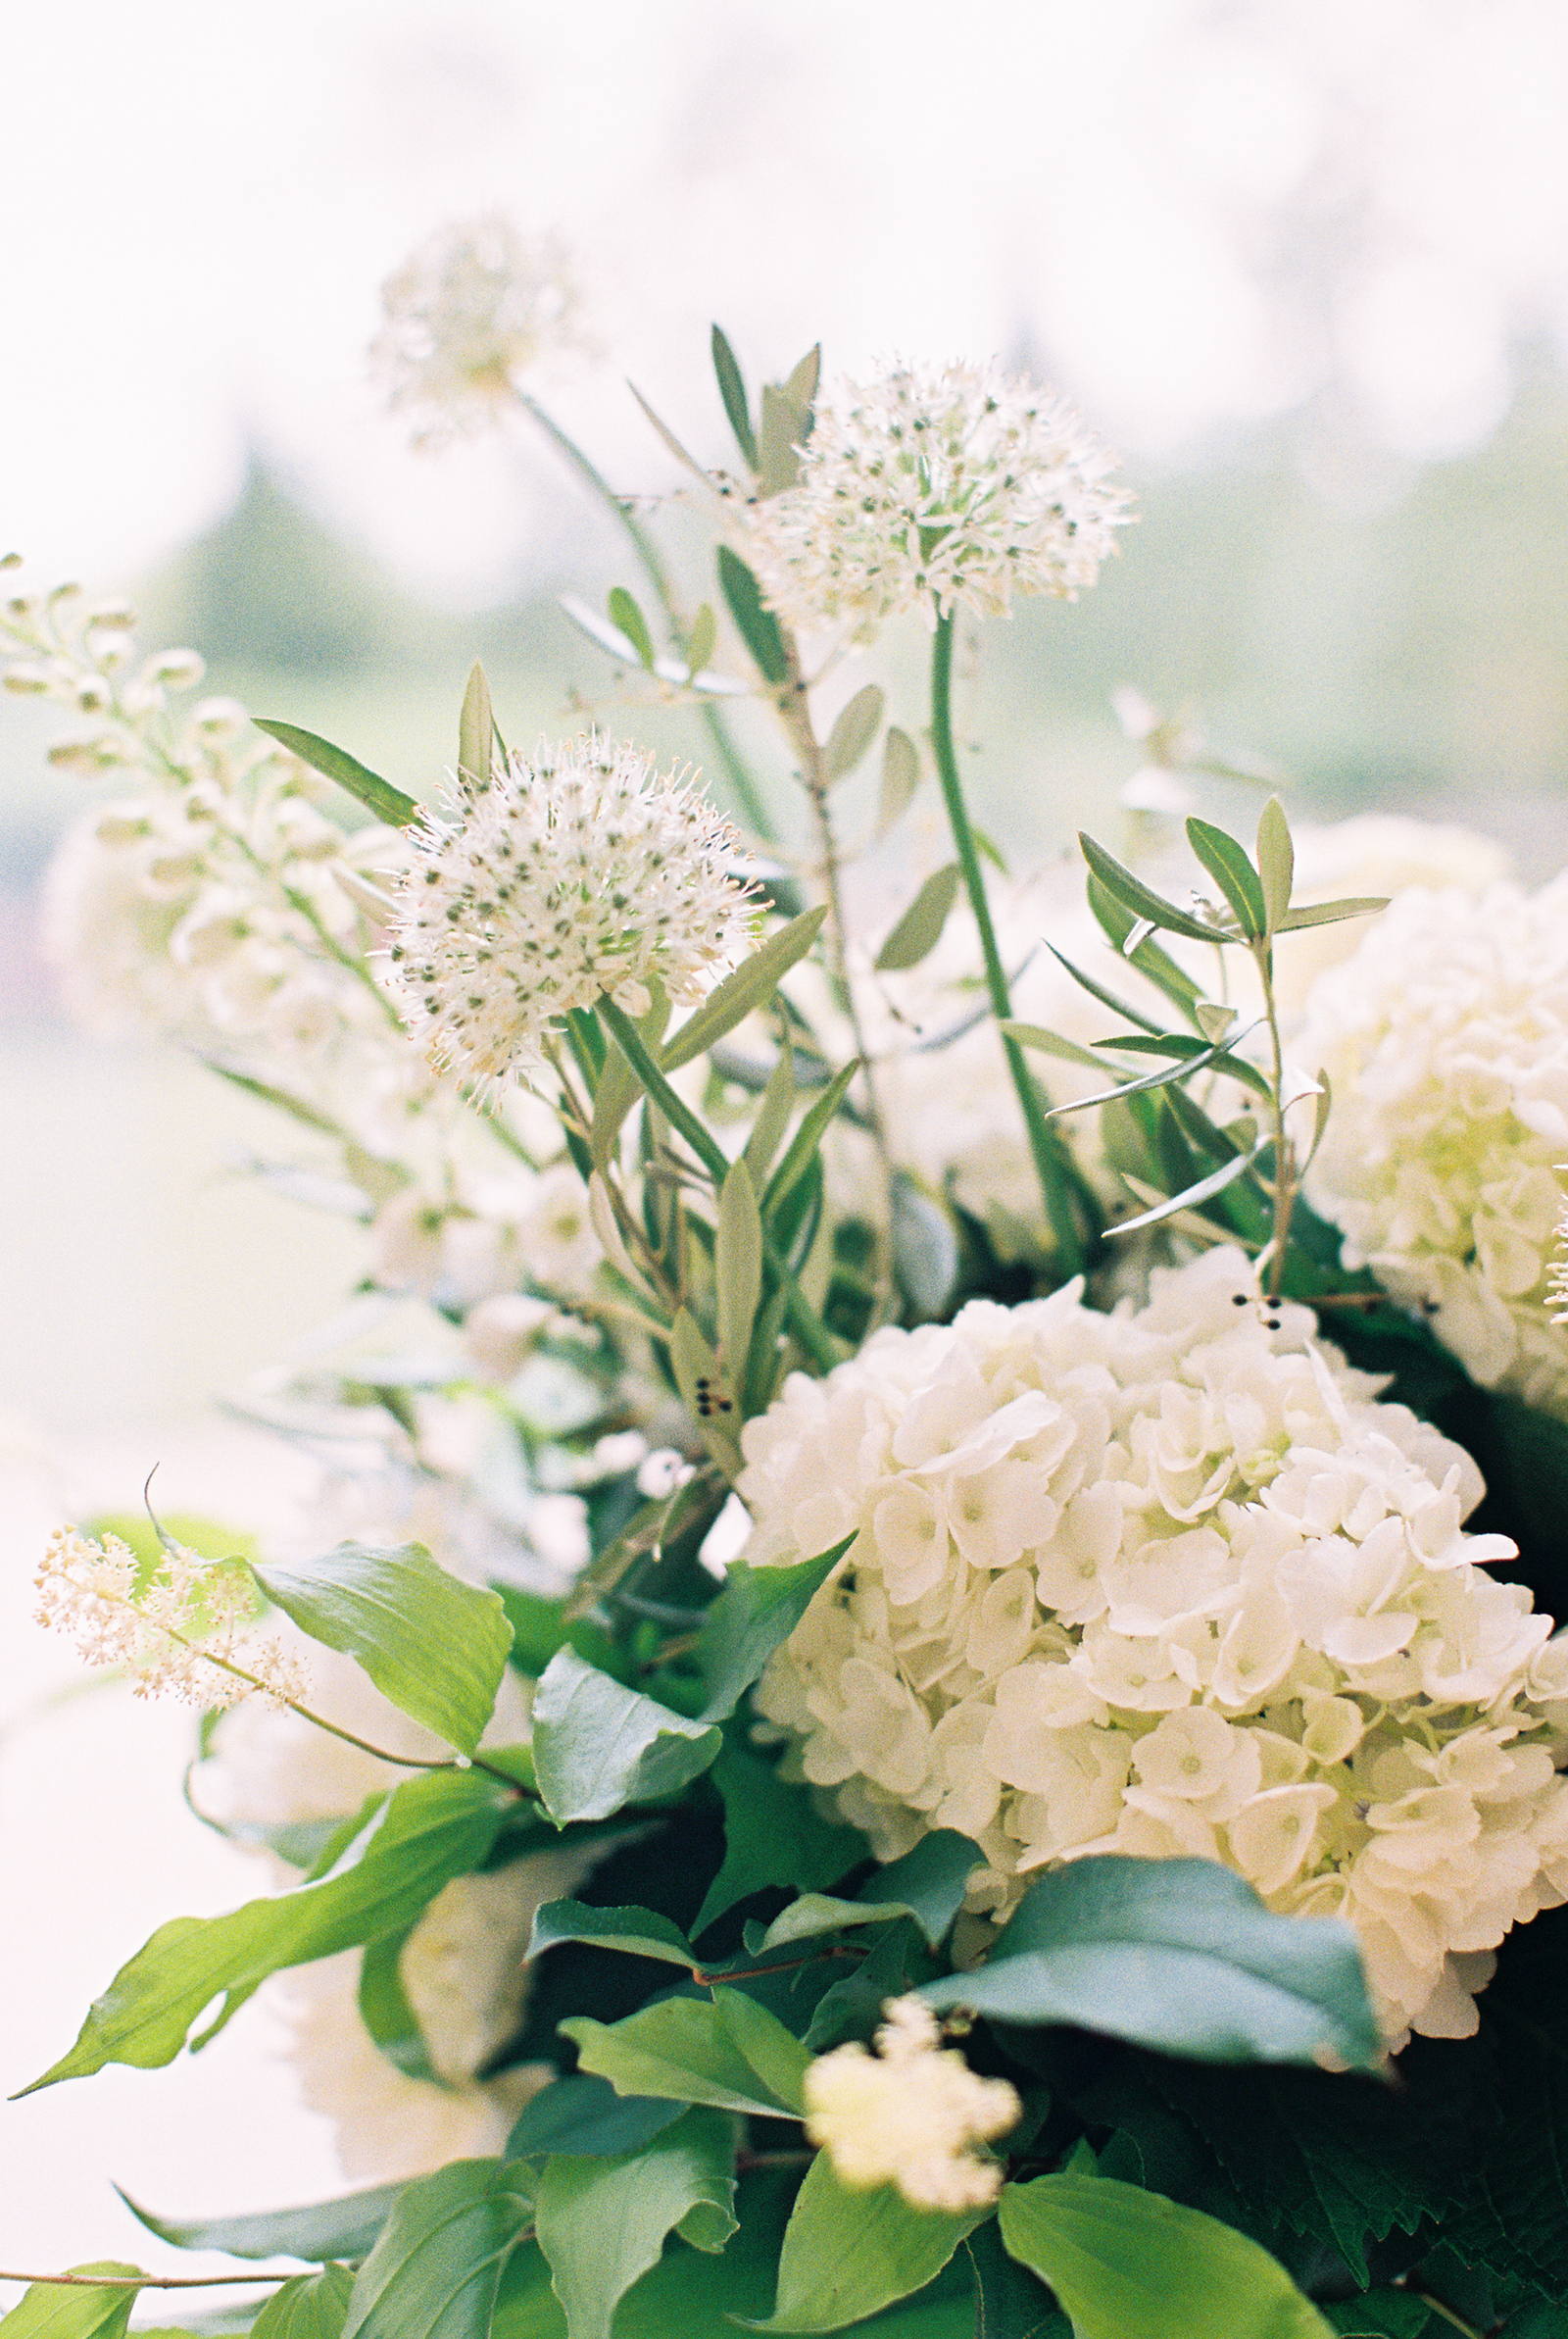 Altar flowers detail with white hydrangea and eucalyptus for monochromatic and minimalist wedding at Greenhouse Loft.